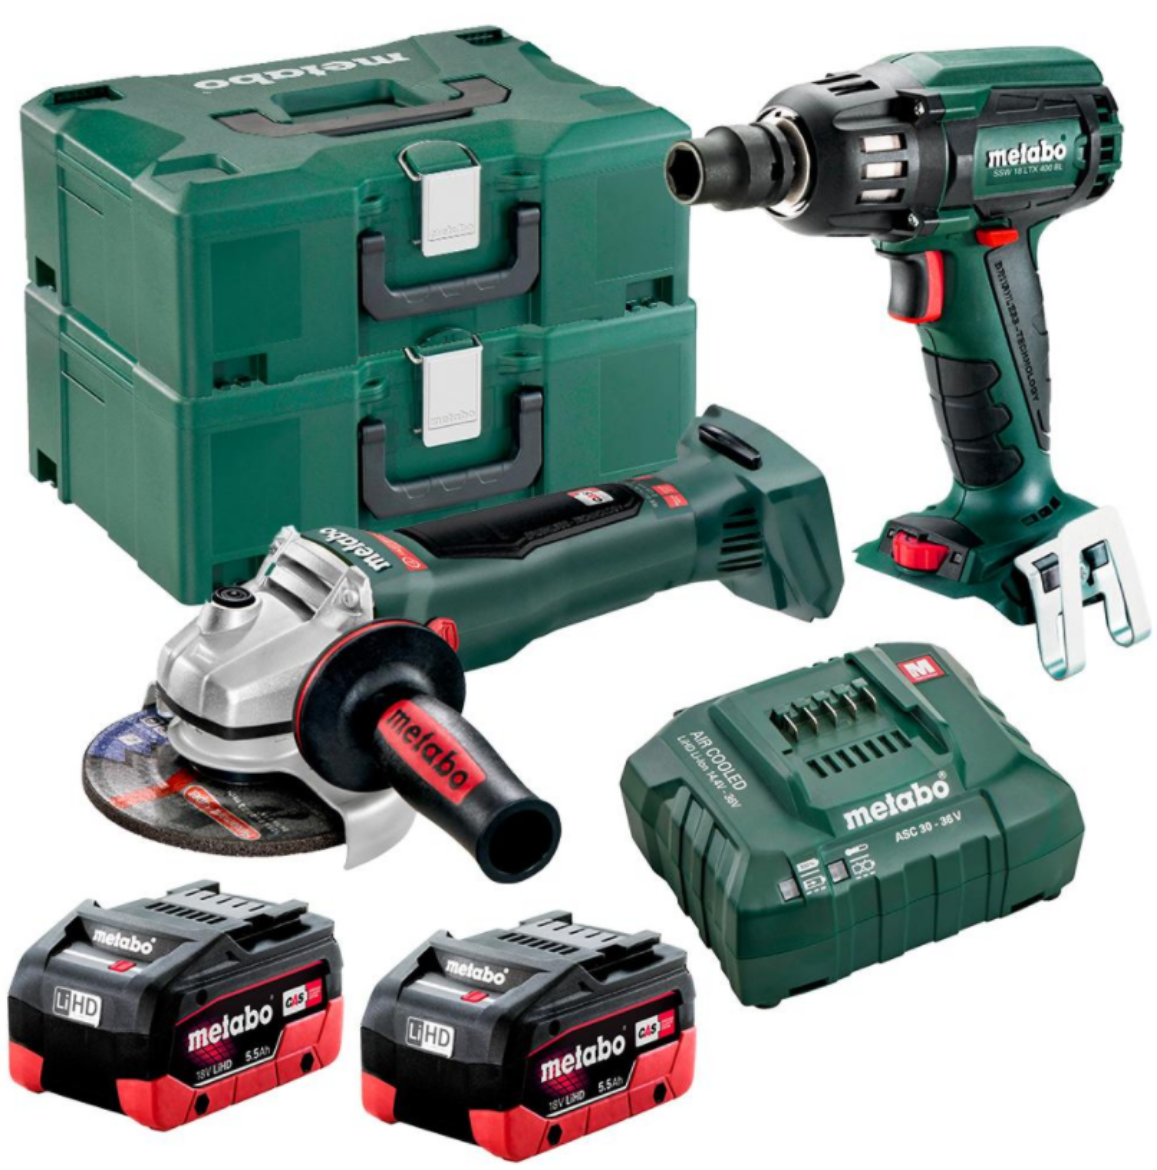 Picture of 18 V BRUSHLESS 1/2 IMPACT WRENCH 130-400 NM +
18 V BRUSHLESS 125 MM ANGLE GRINDER WITH BRAKE & QUICK LOCKING NUT
(2 x 5.5AH LIHD BATTERY PACKS, ASC 55 V AIR-COOLED CHARGER, 2 x METALOC CASES)